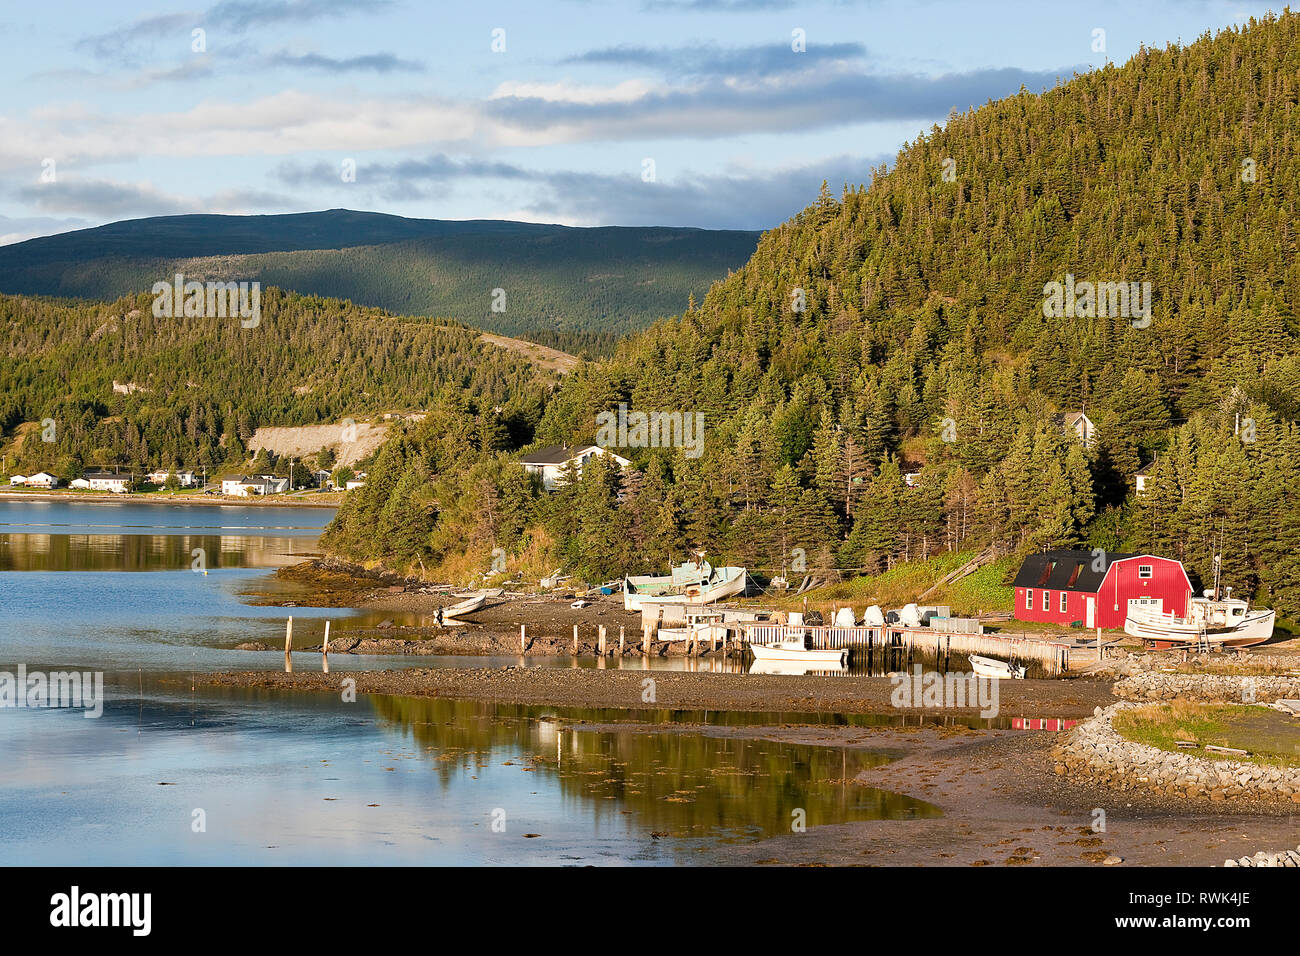 Homes spread out at the foot of mountainous terrain along the shore of Neddies Harbour, Norris Point,Gros Morne National Park, Newfoundland, Canada Stock Photo